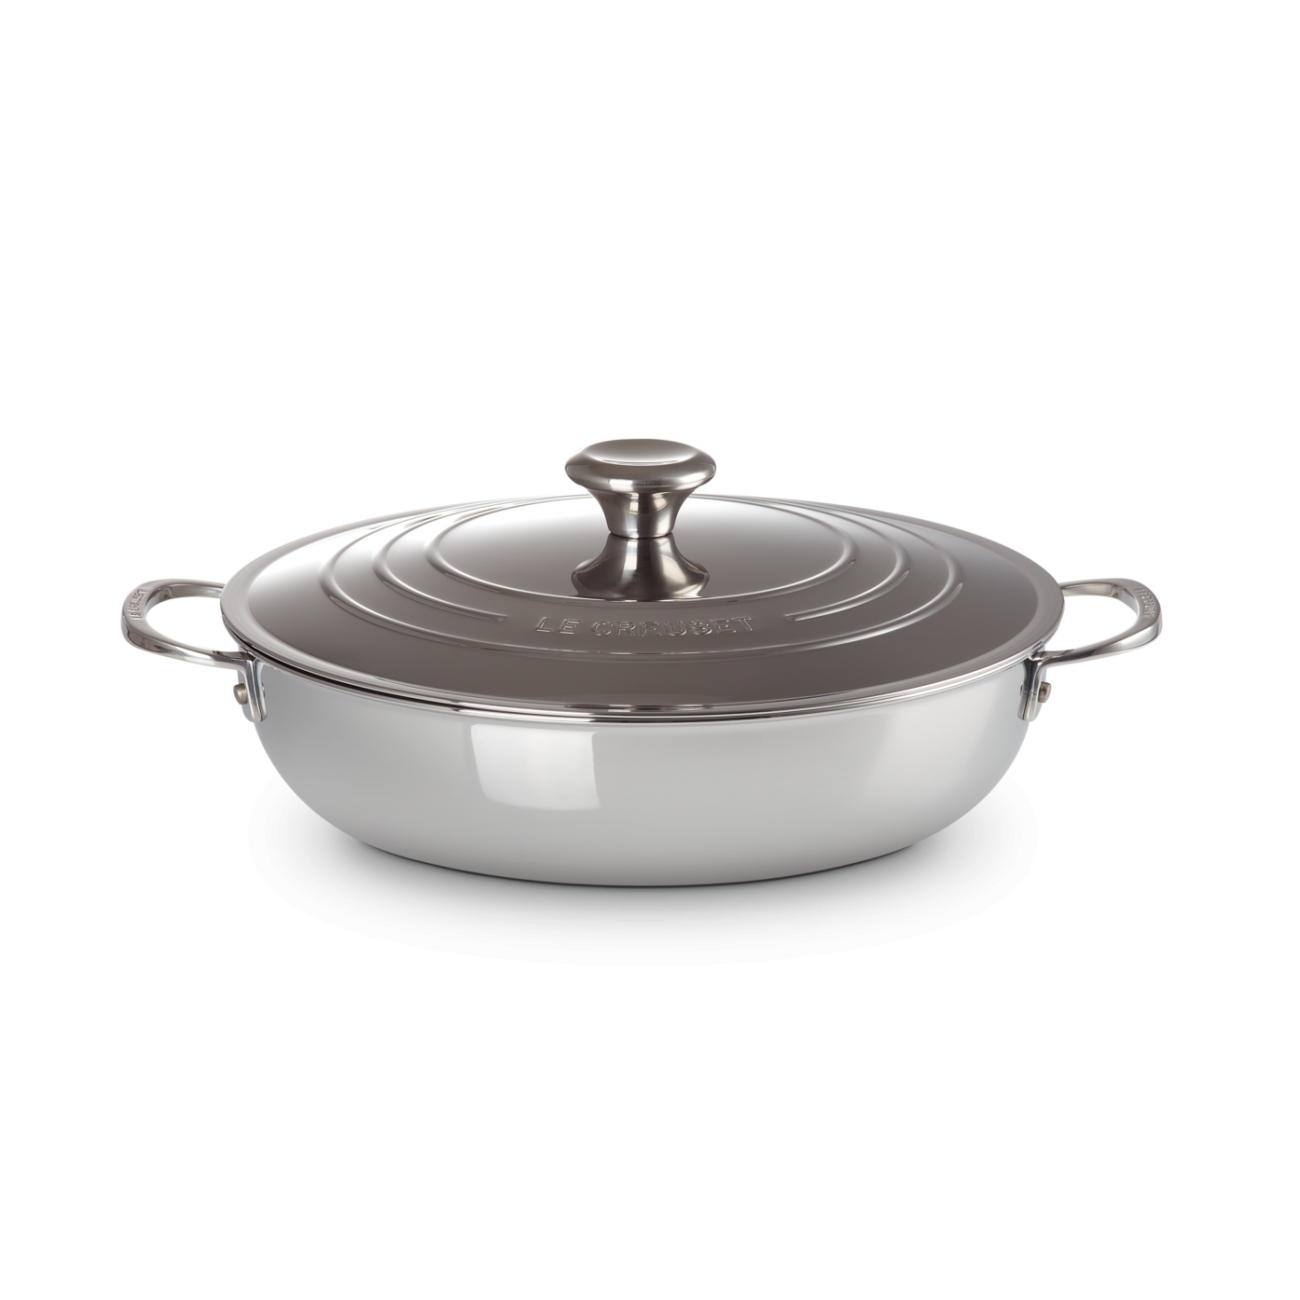 https://www.tattahome.com/53088-large_default/le-creuset-signature-stainless-steel-shallow-casserole-with-lid.jpg